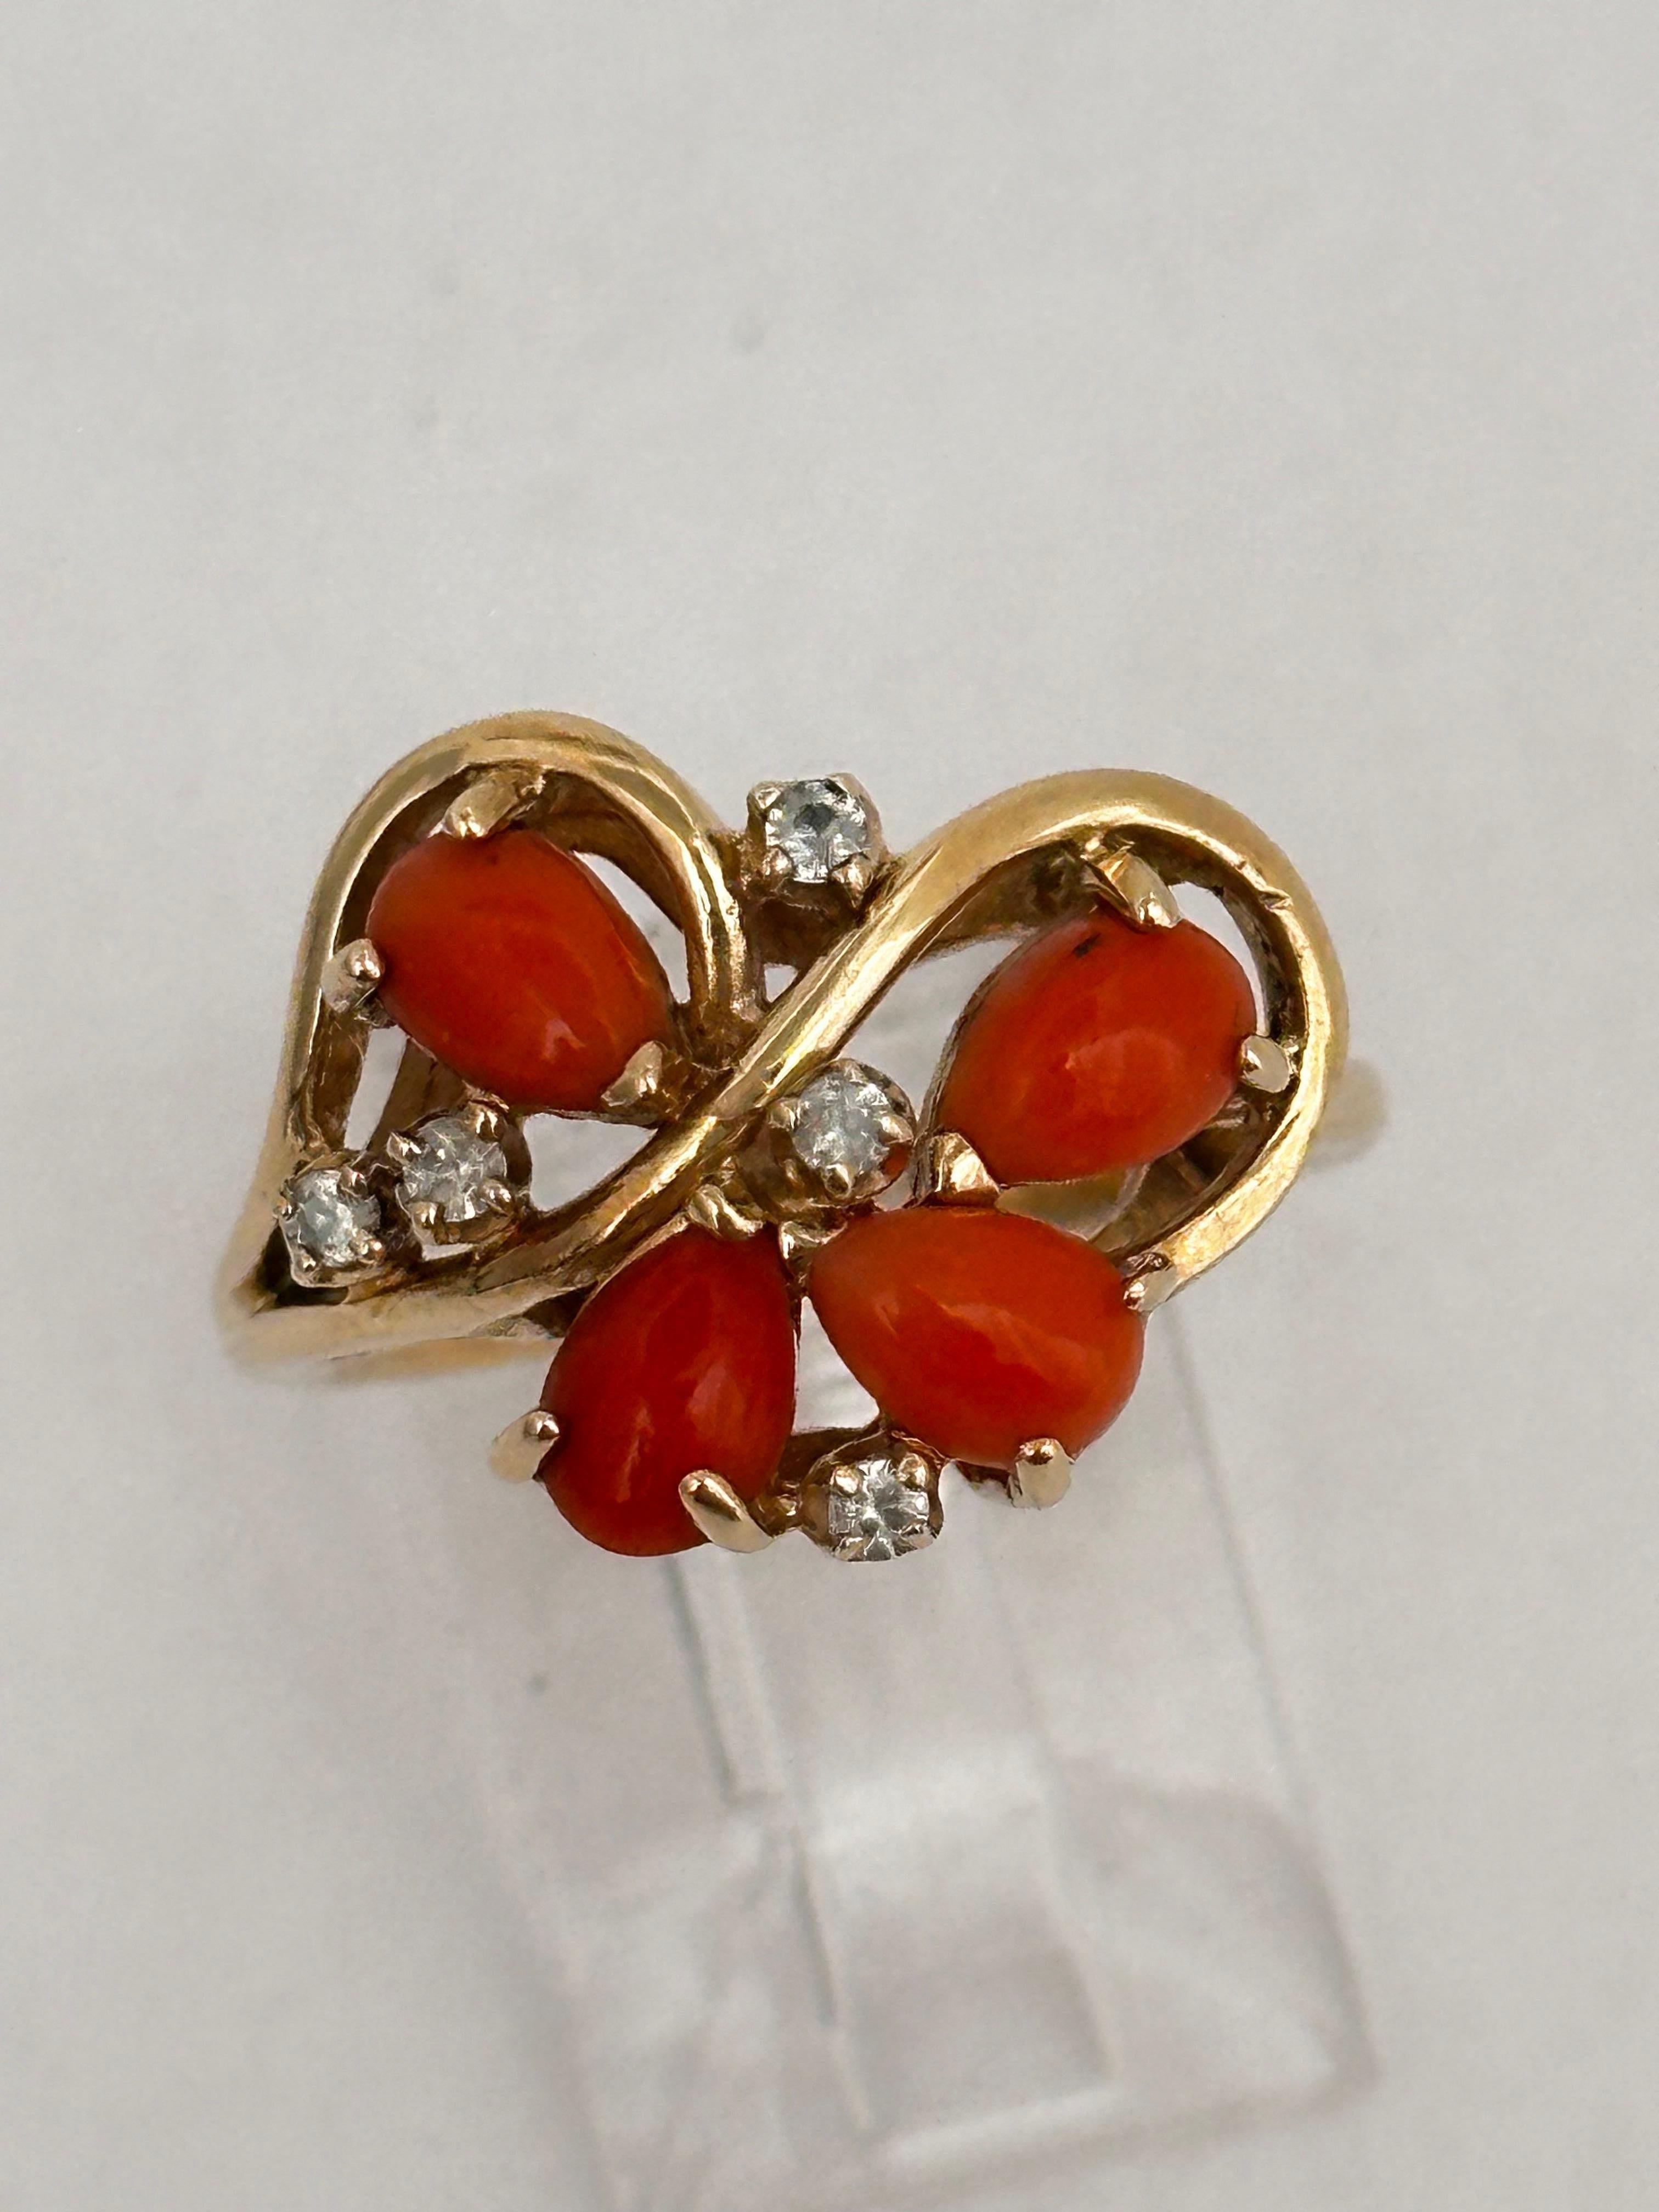 14k Yellow Gold  4 Pear Shaped Coral and Diamonds  Ring Size 6 1/4 For Sale 1